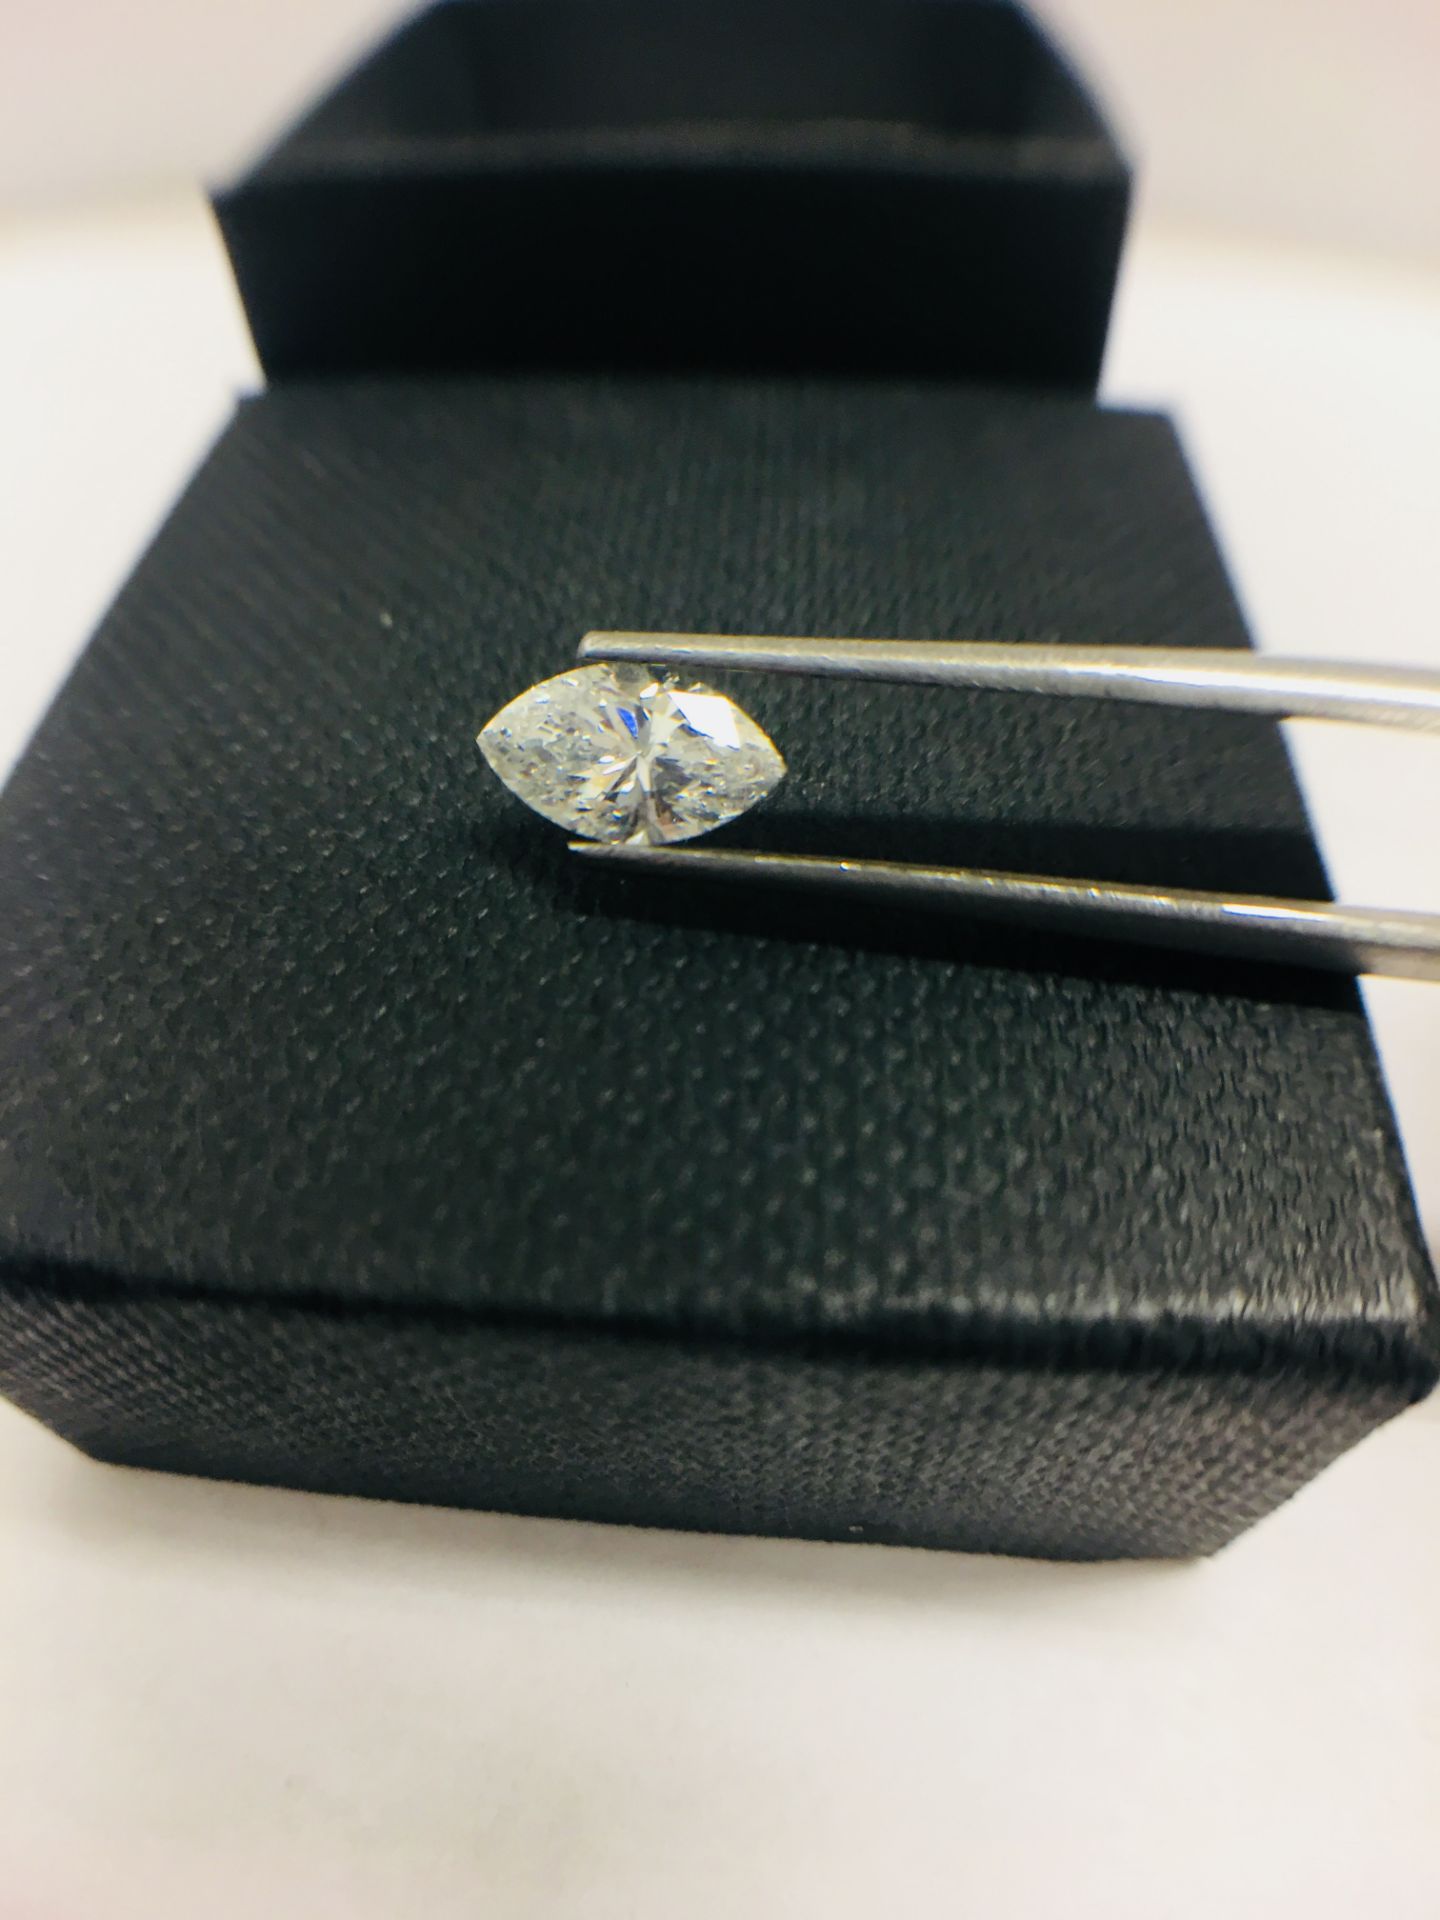 1.01ct Marquis cut Natural Diamond,H colour vs clarity,excellent cut,certificationcan be provided - Image 2 of 3